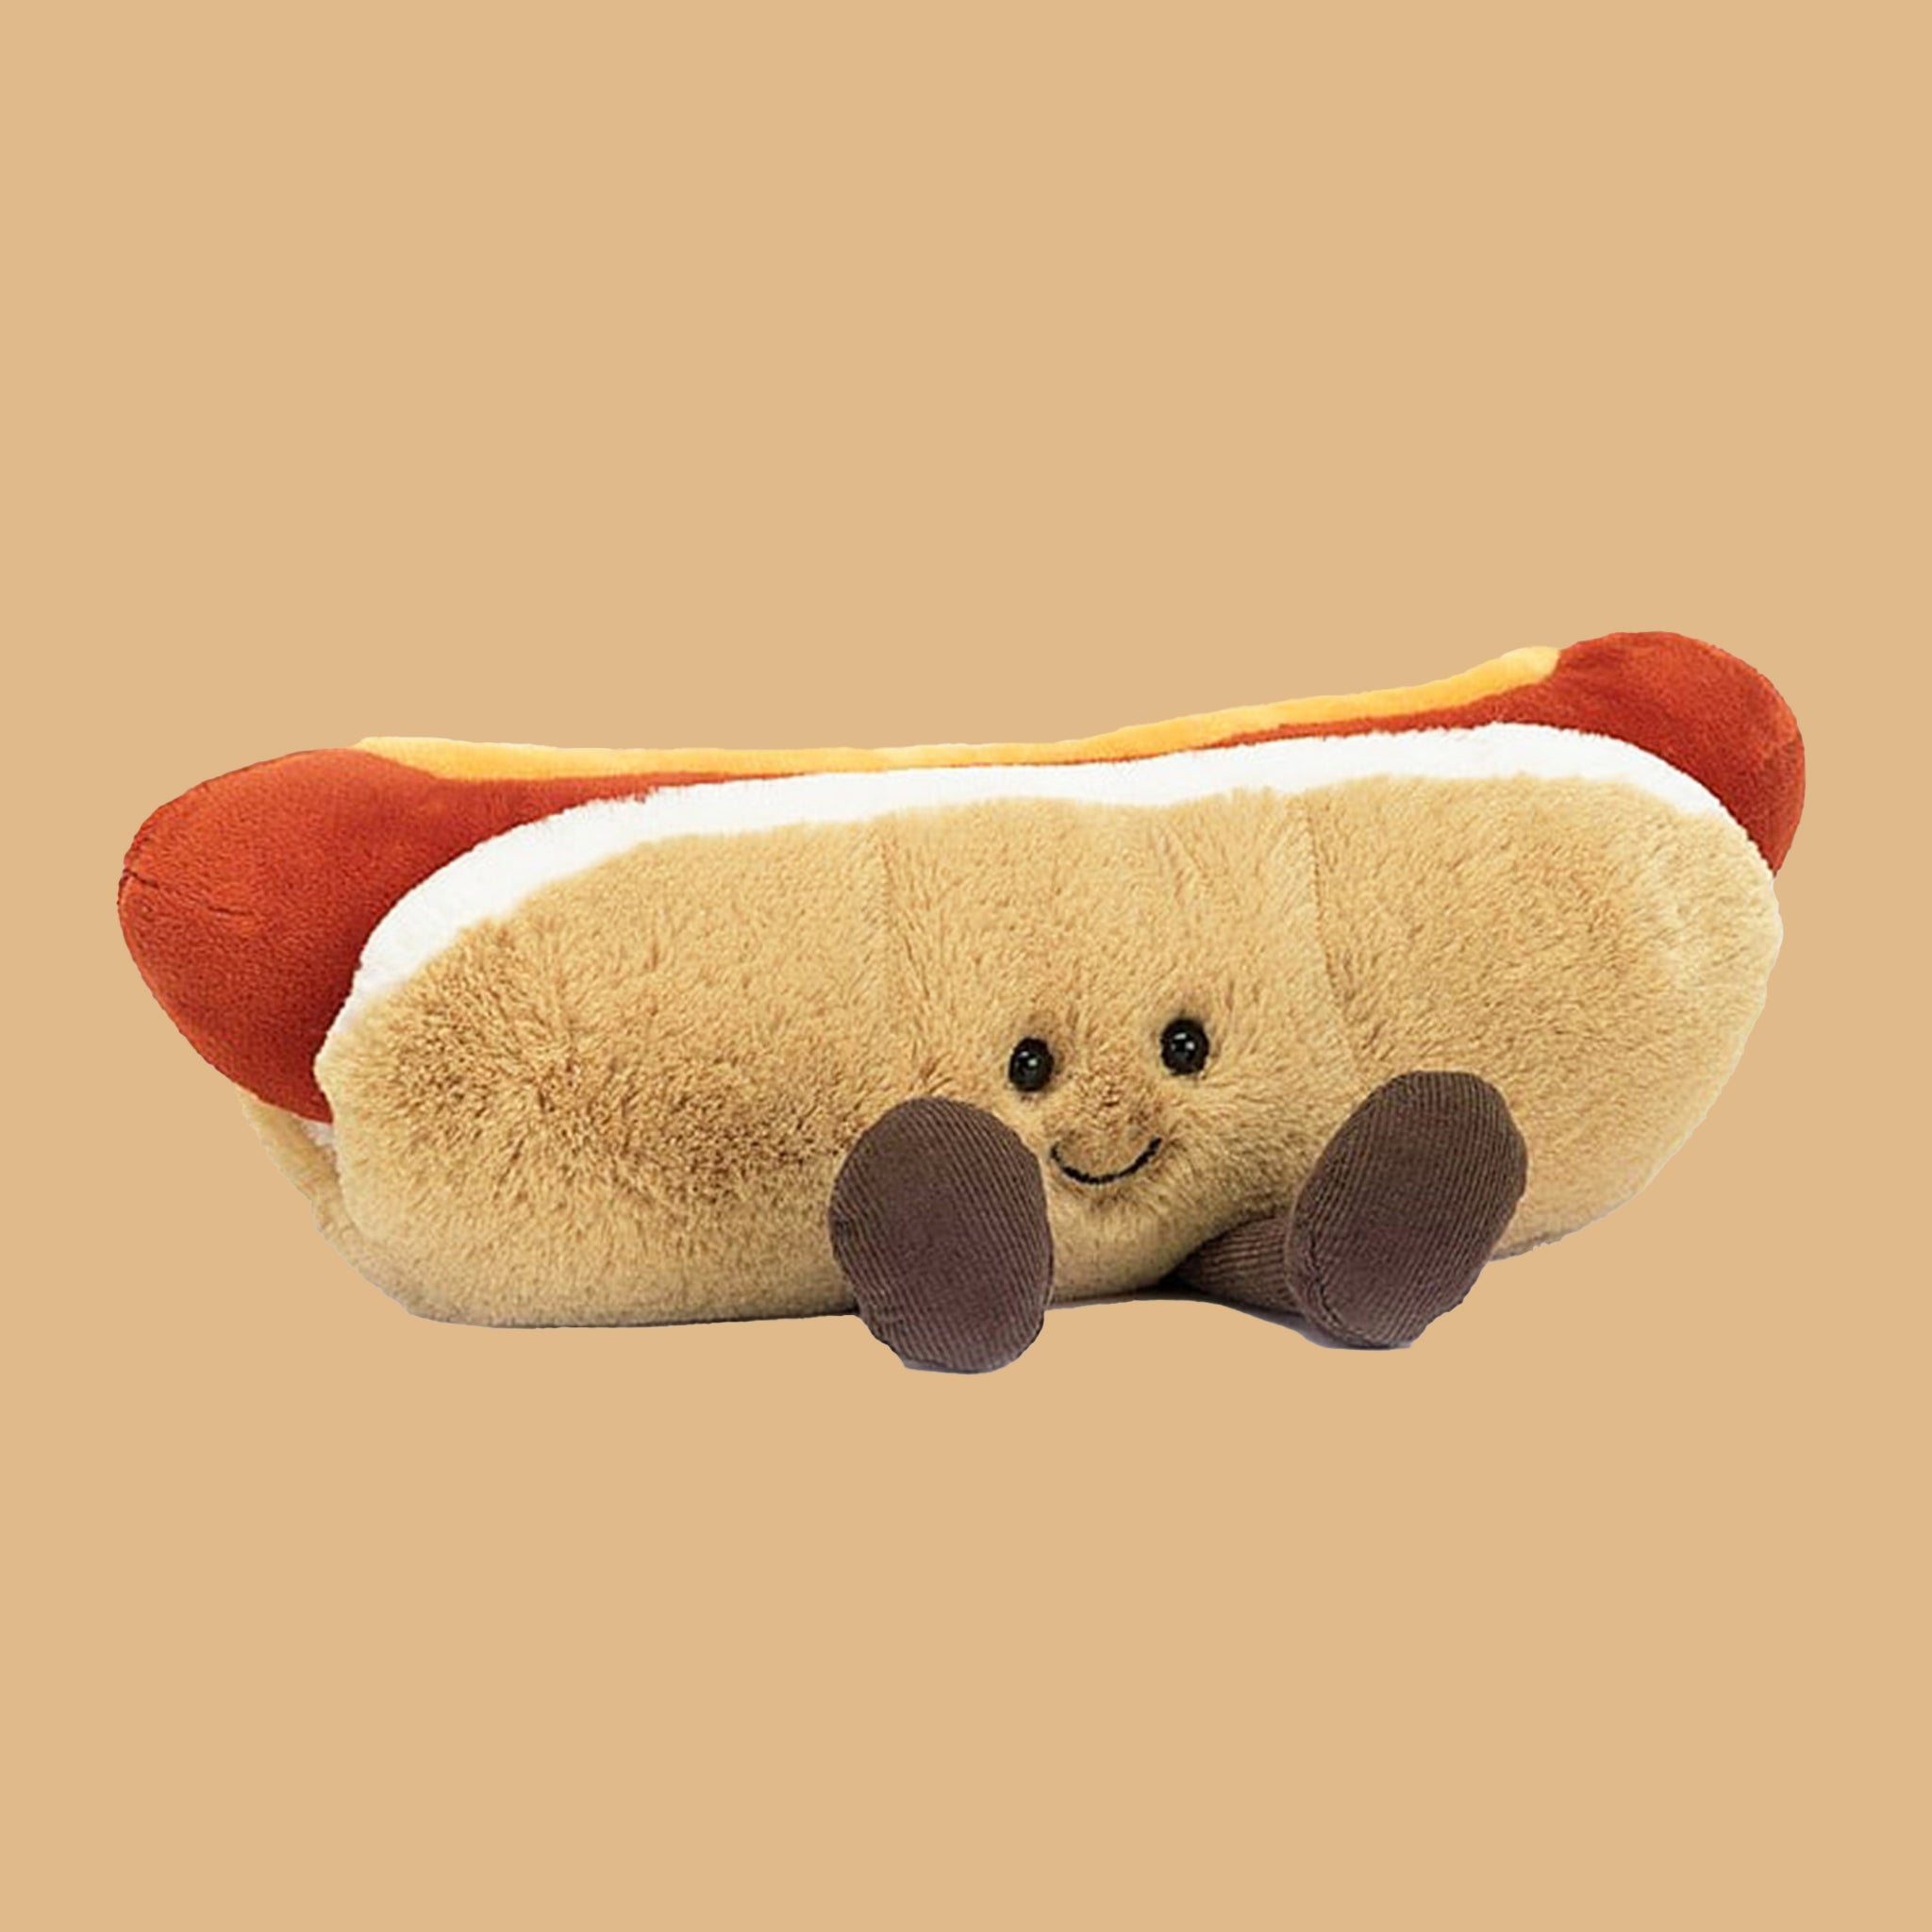 On a neutral background is an amusable hot dog stuffed animal.